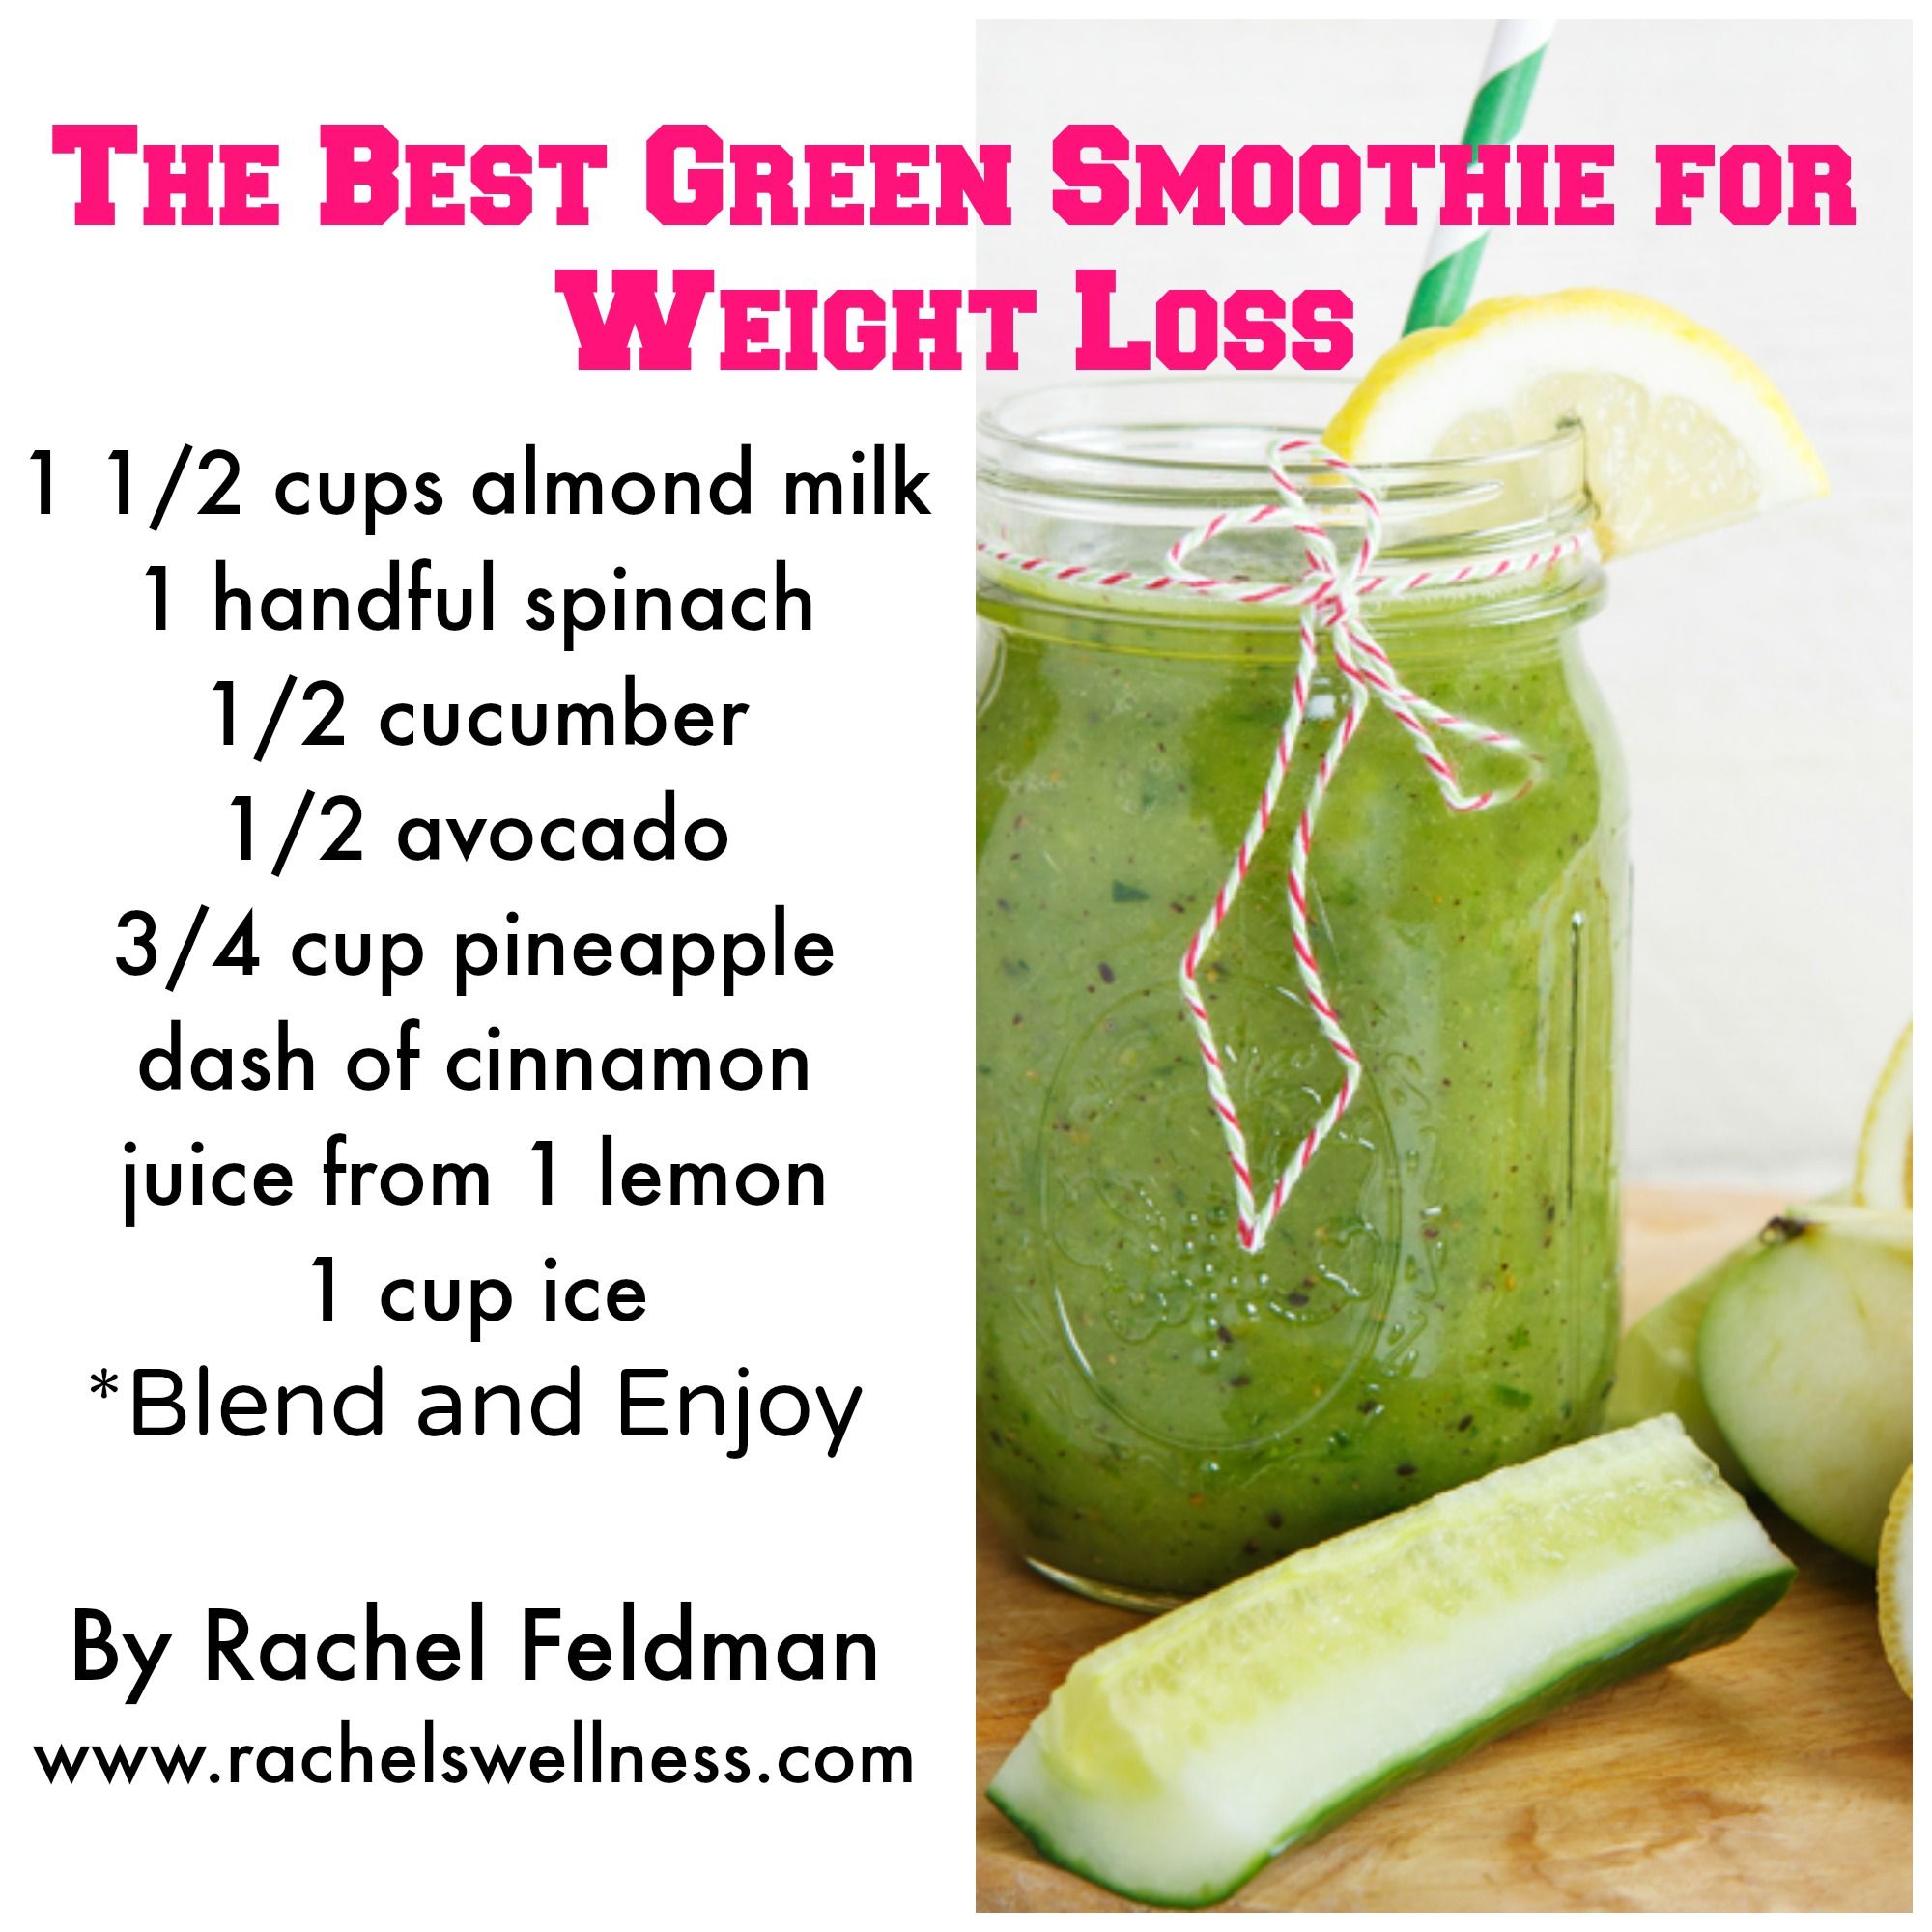 Green Smoothie Ideas For Weight Loss